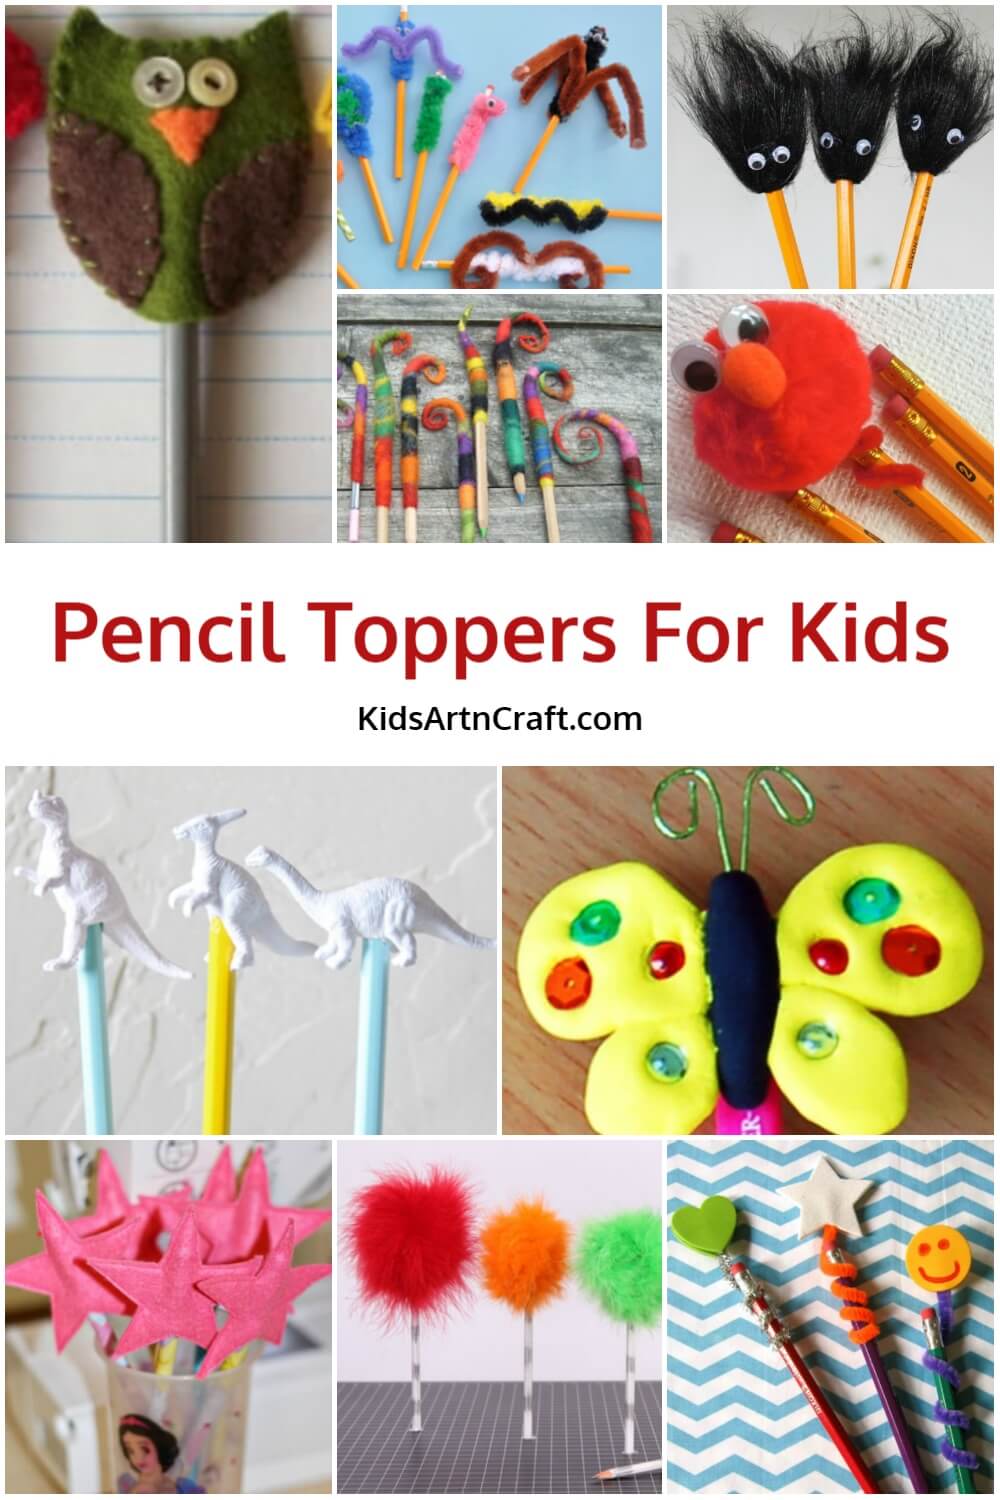 Pencil Toppers For Kids